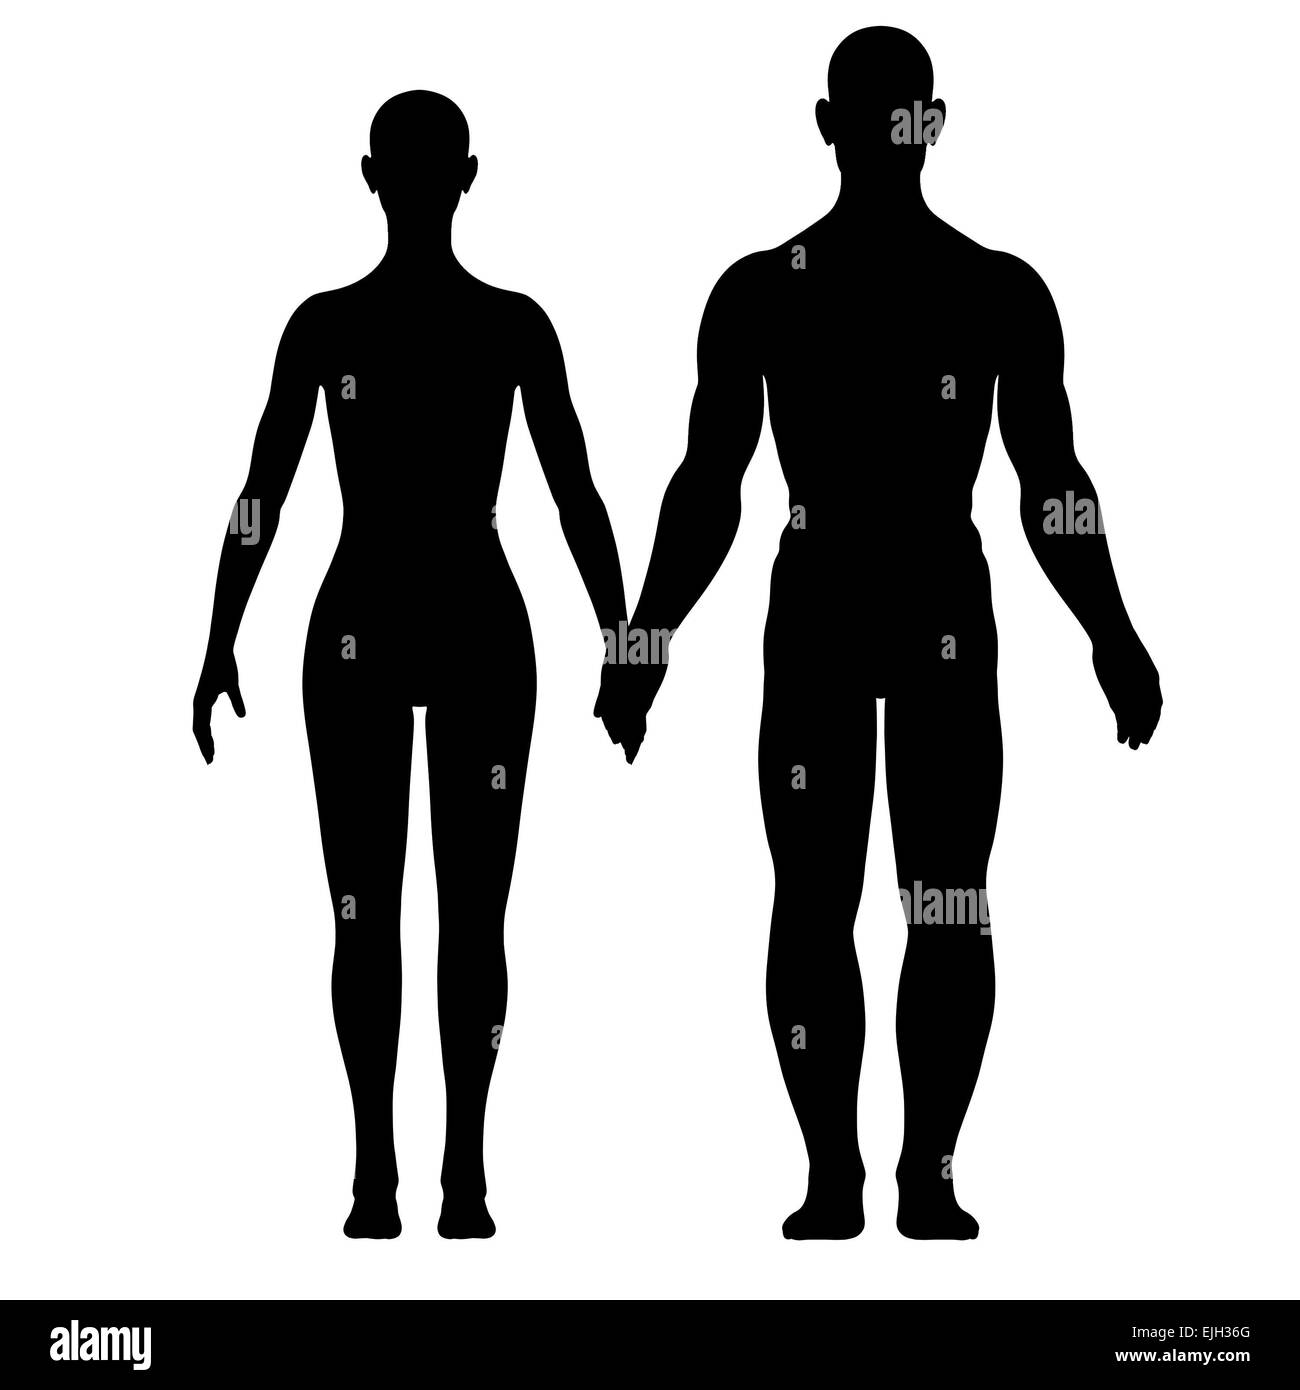 Illustration of silhouette of woman and man holding hands Stock Photo